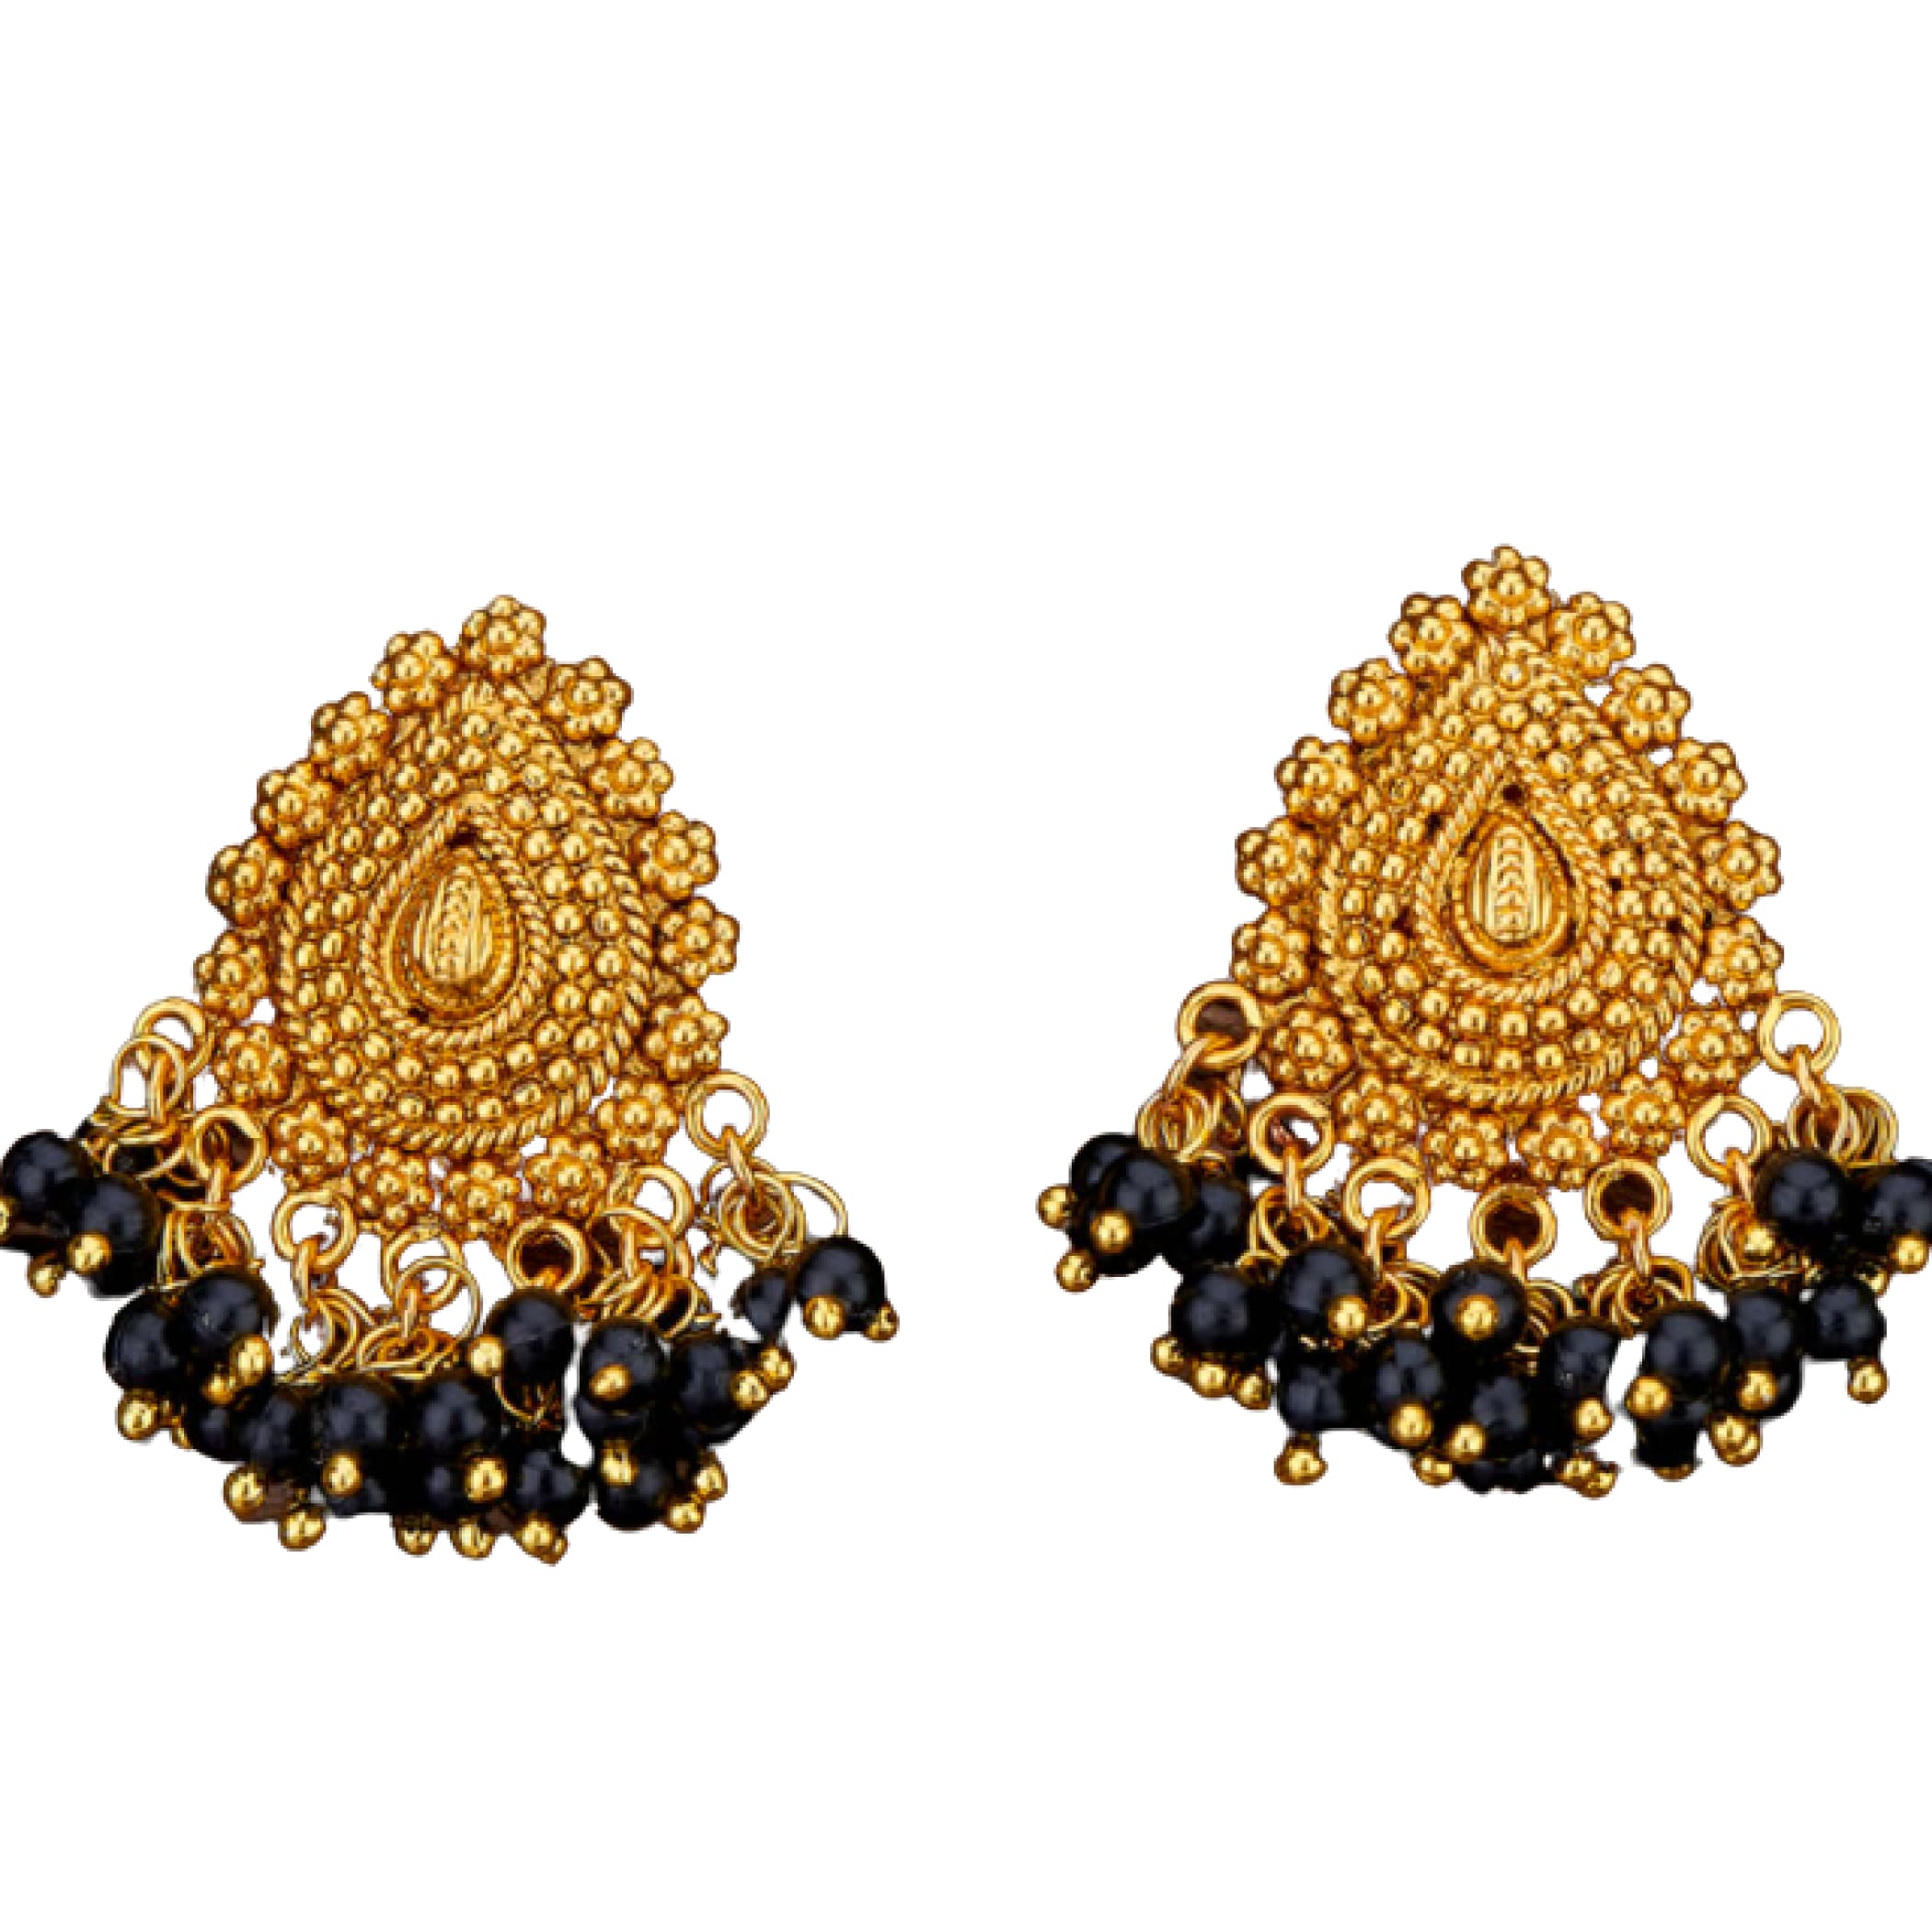 Ethnic chandelier earrings traditional south indian